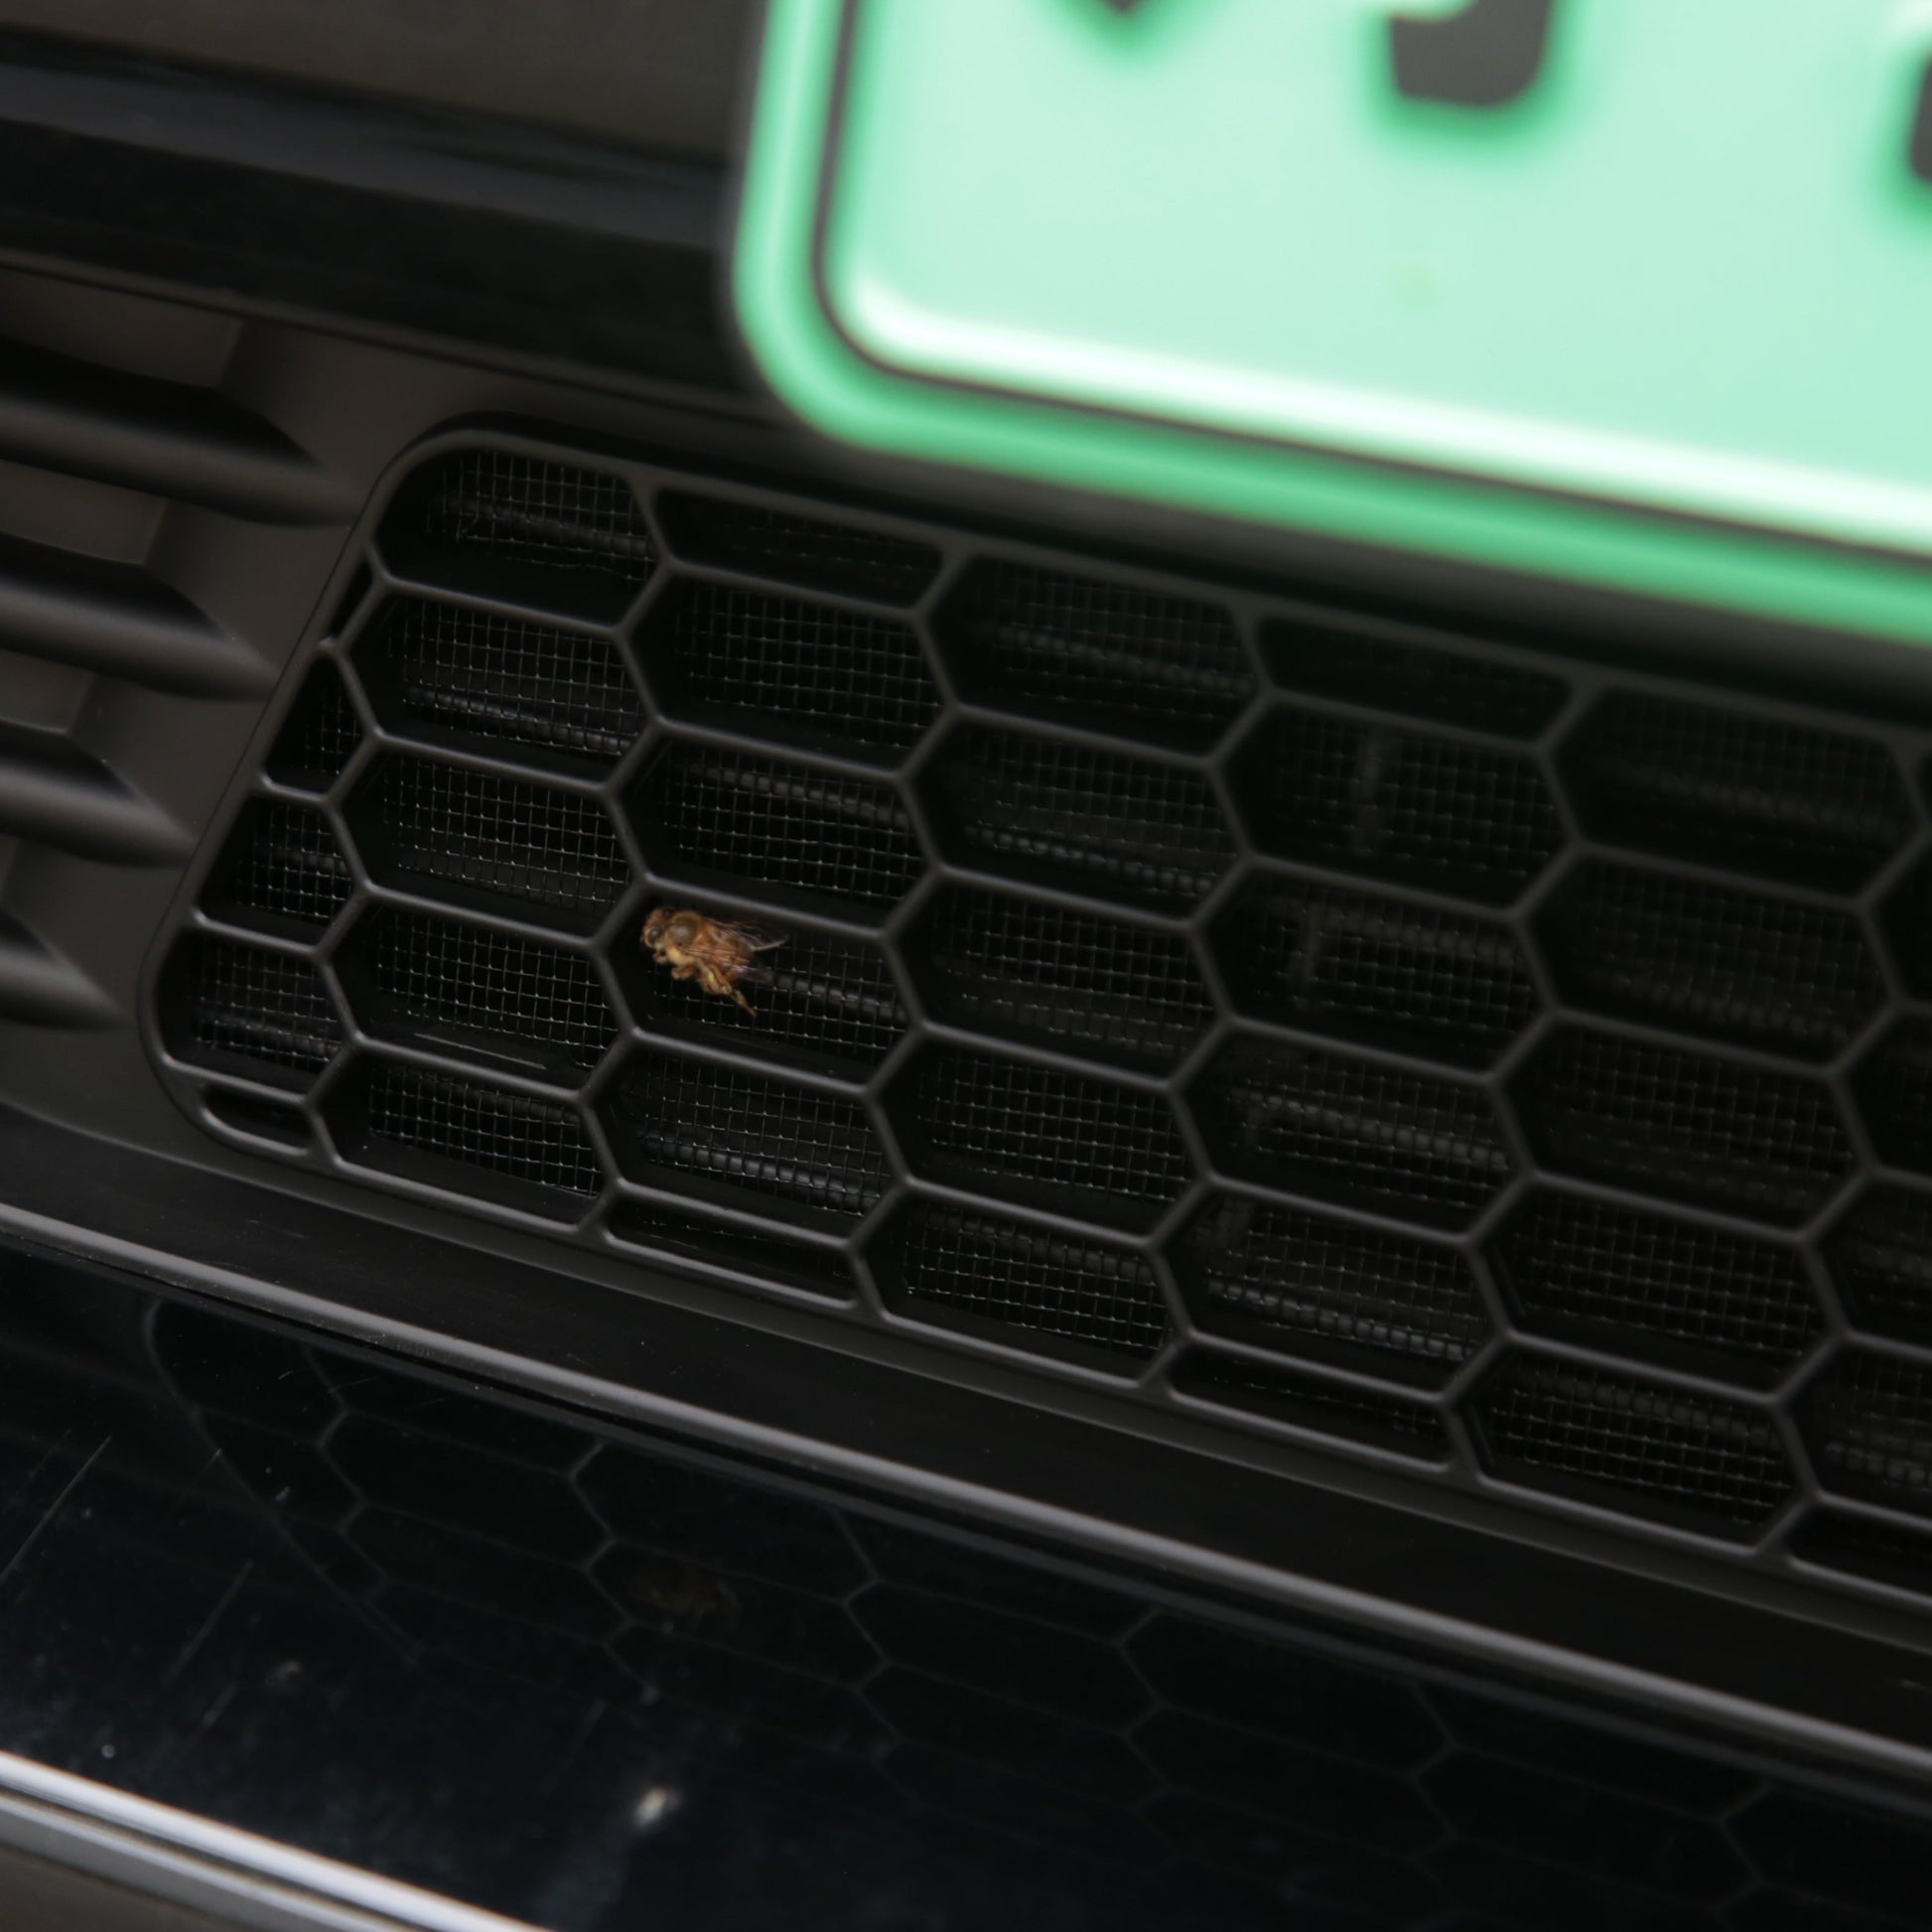 Insect screens suitable for Tesla Model 3 2017-2023 - Tesery Official Store